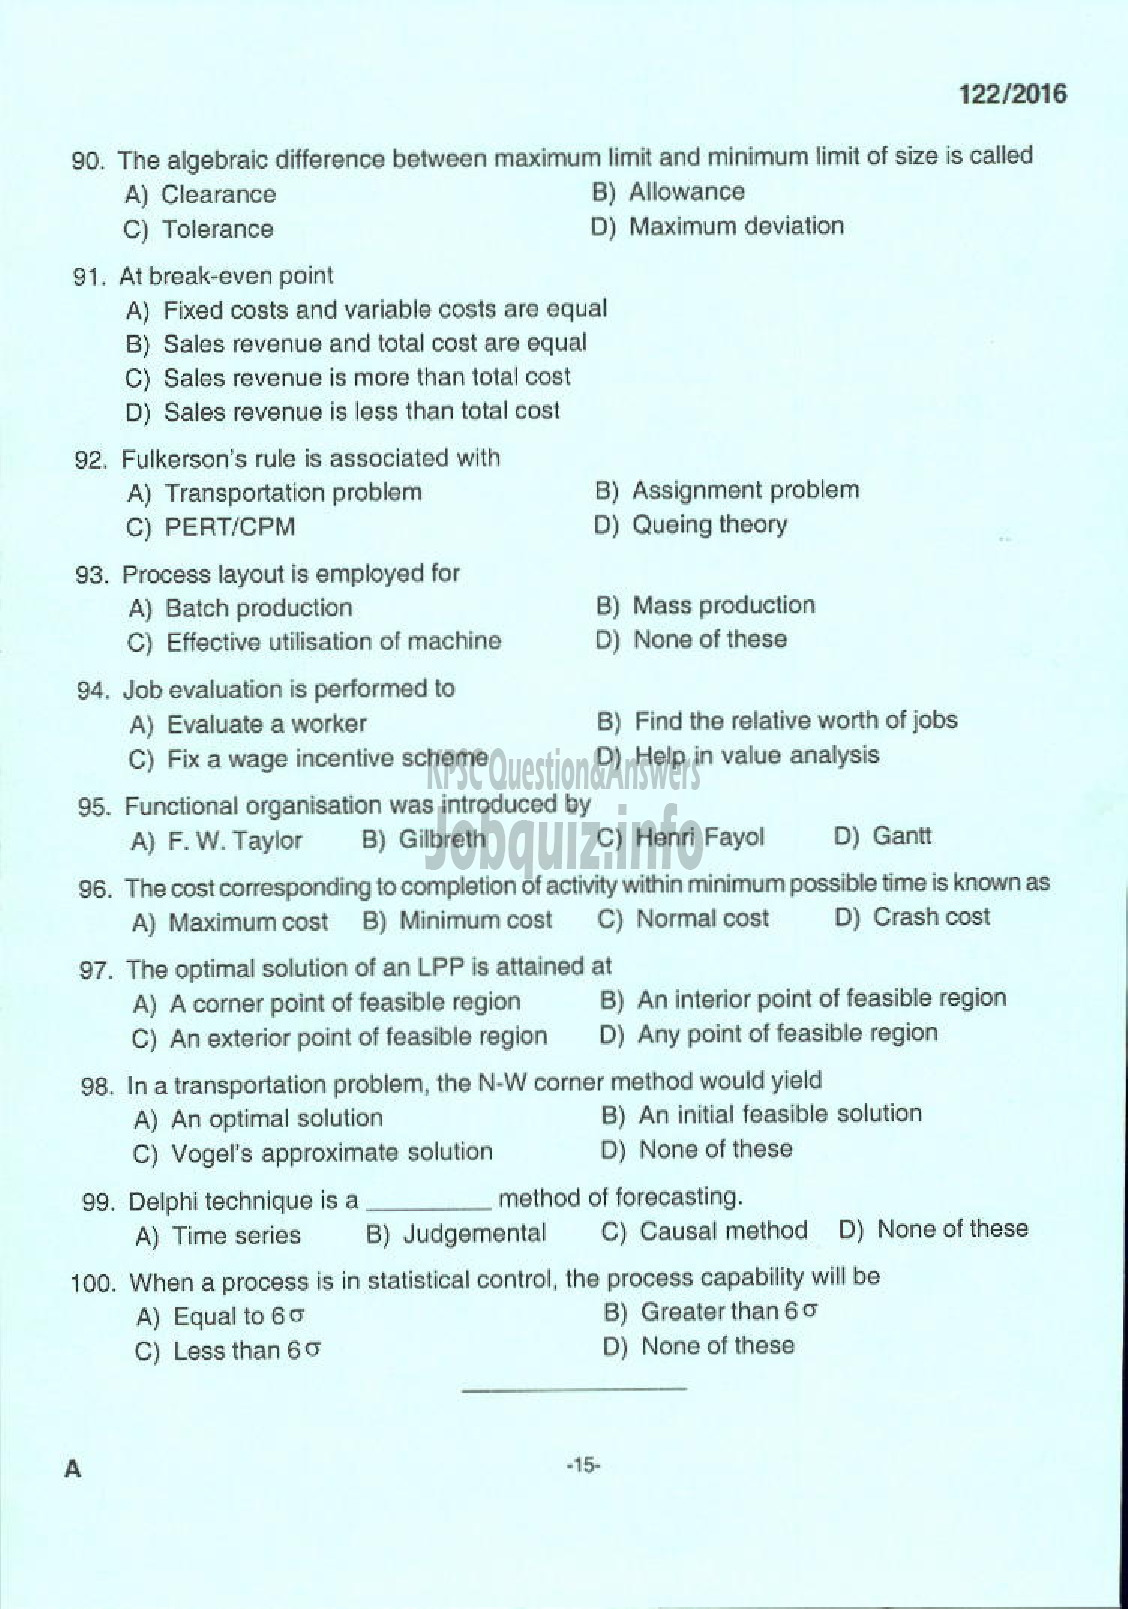 Kerala PSC Question Paper - ASSISTANT PROFESSOR MECHANICAL ENGINEERING TECHNICAL EDUCATION ENGINEERING DCOLLEGES-13